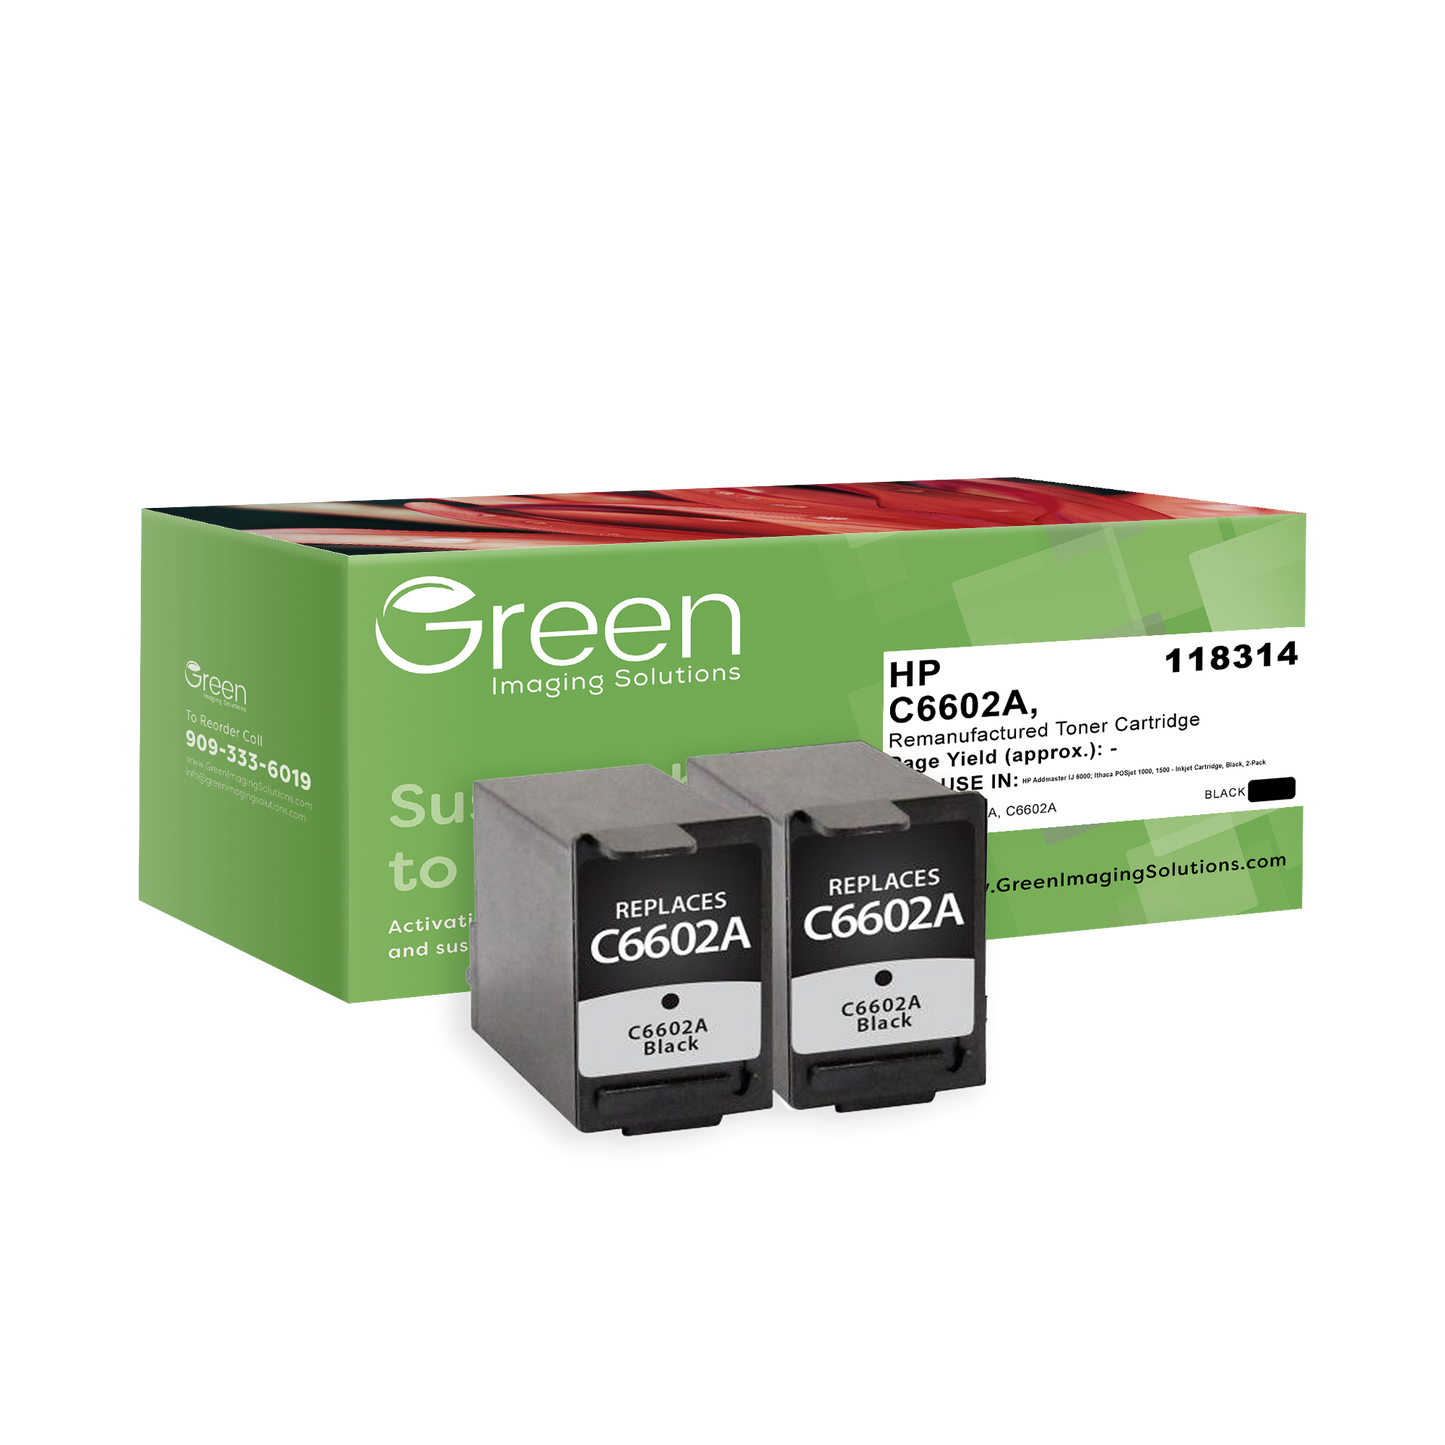 Green Imaging Solutions USA Remanufactured Black Ink Cartridges for HP C6602A 2-Pack